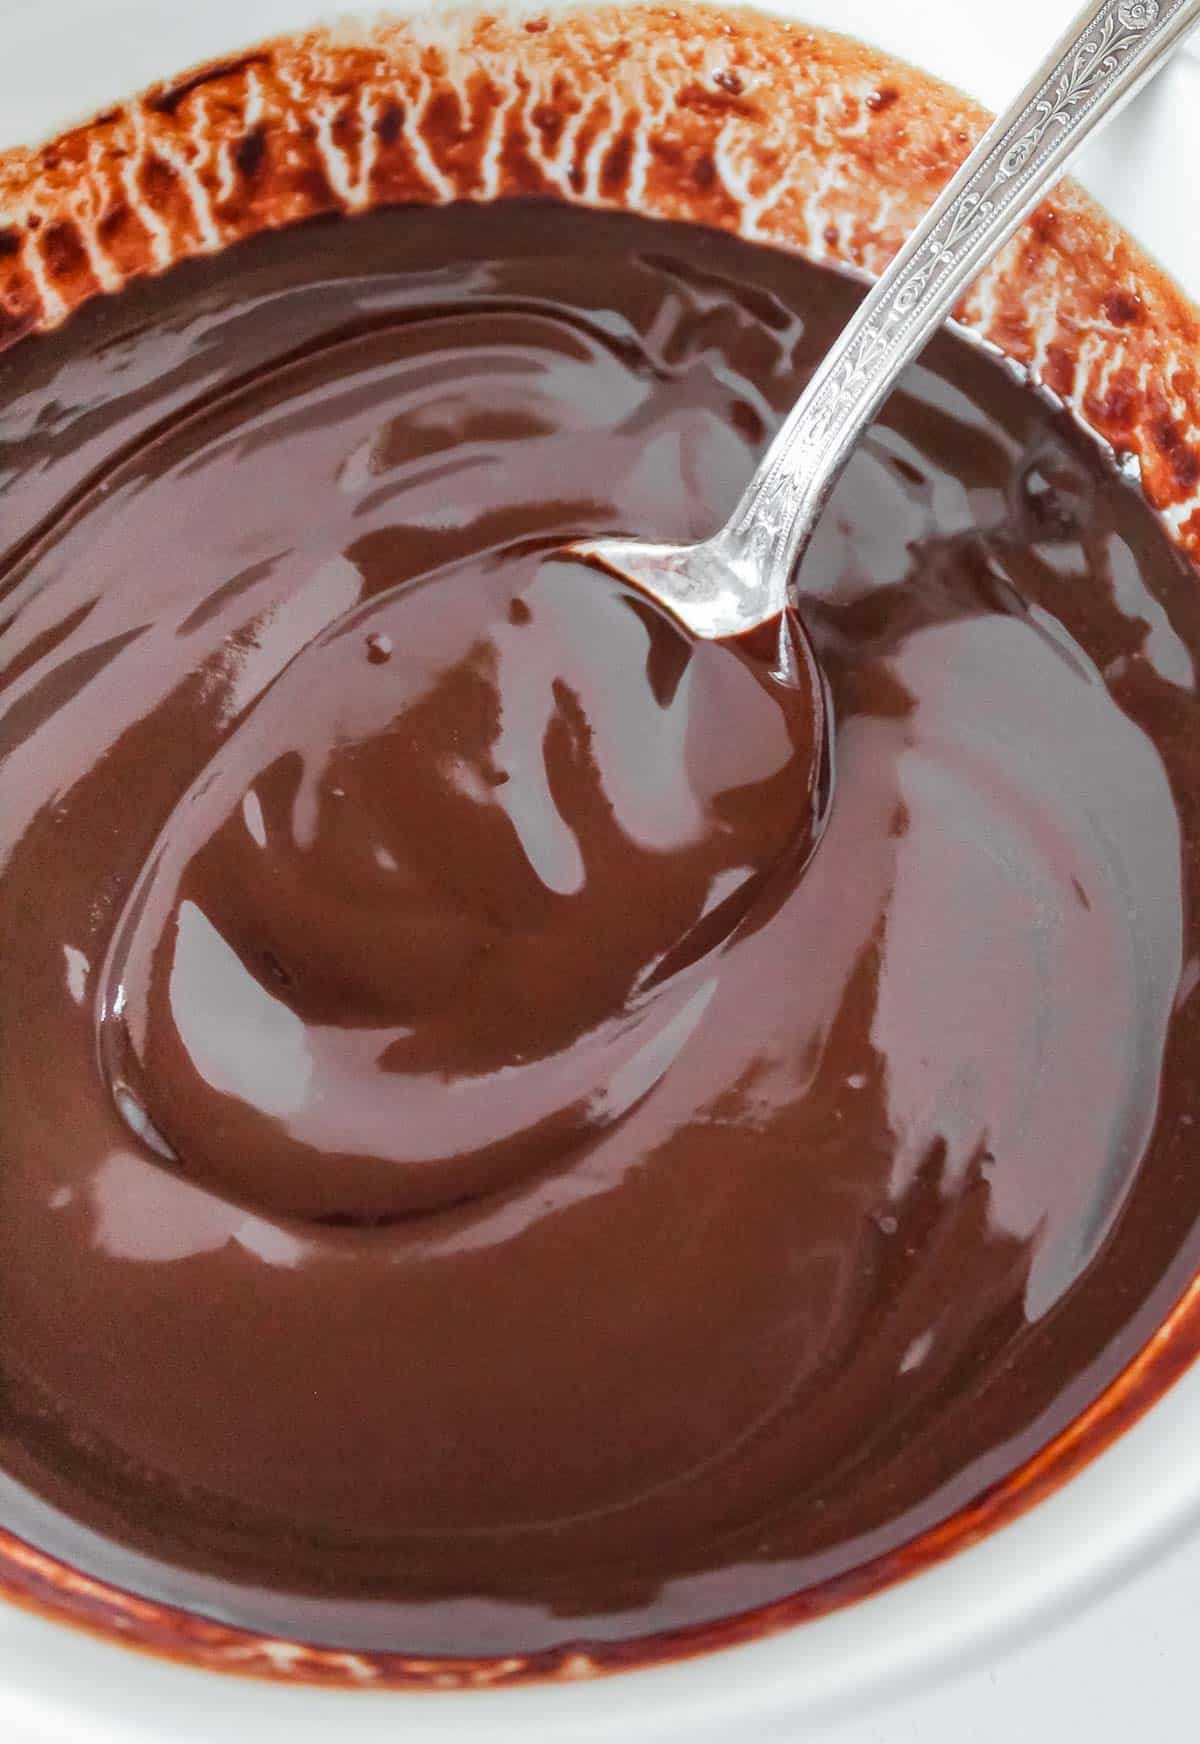 Chocolate sauce in a bowl with a spoon.